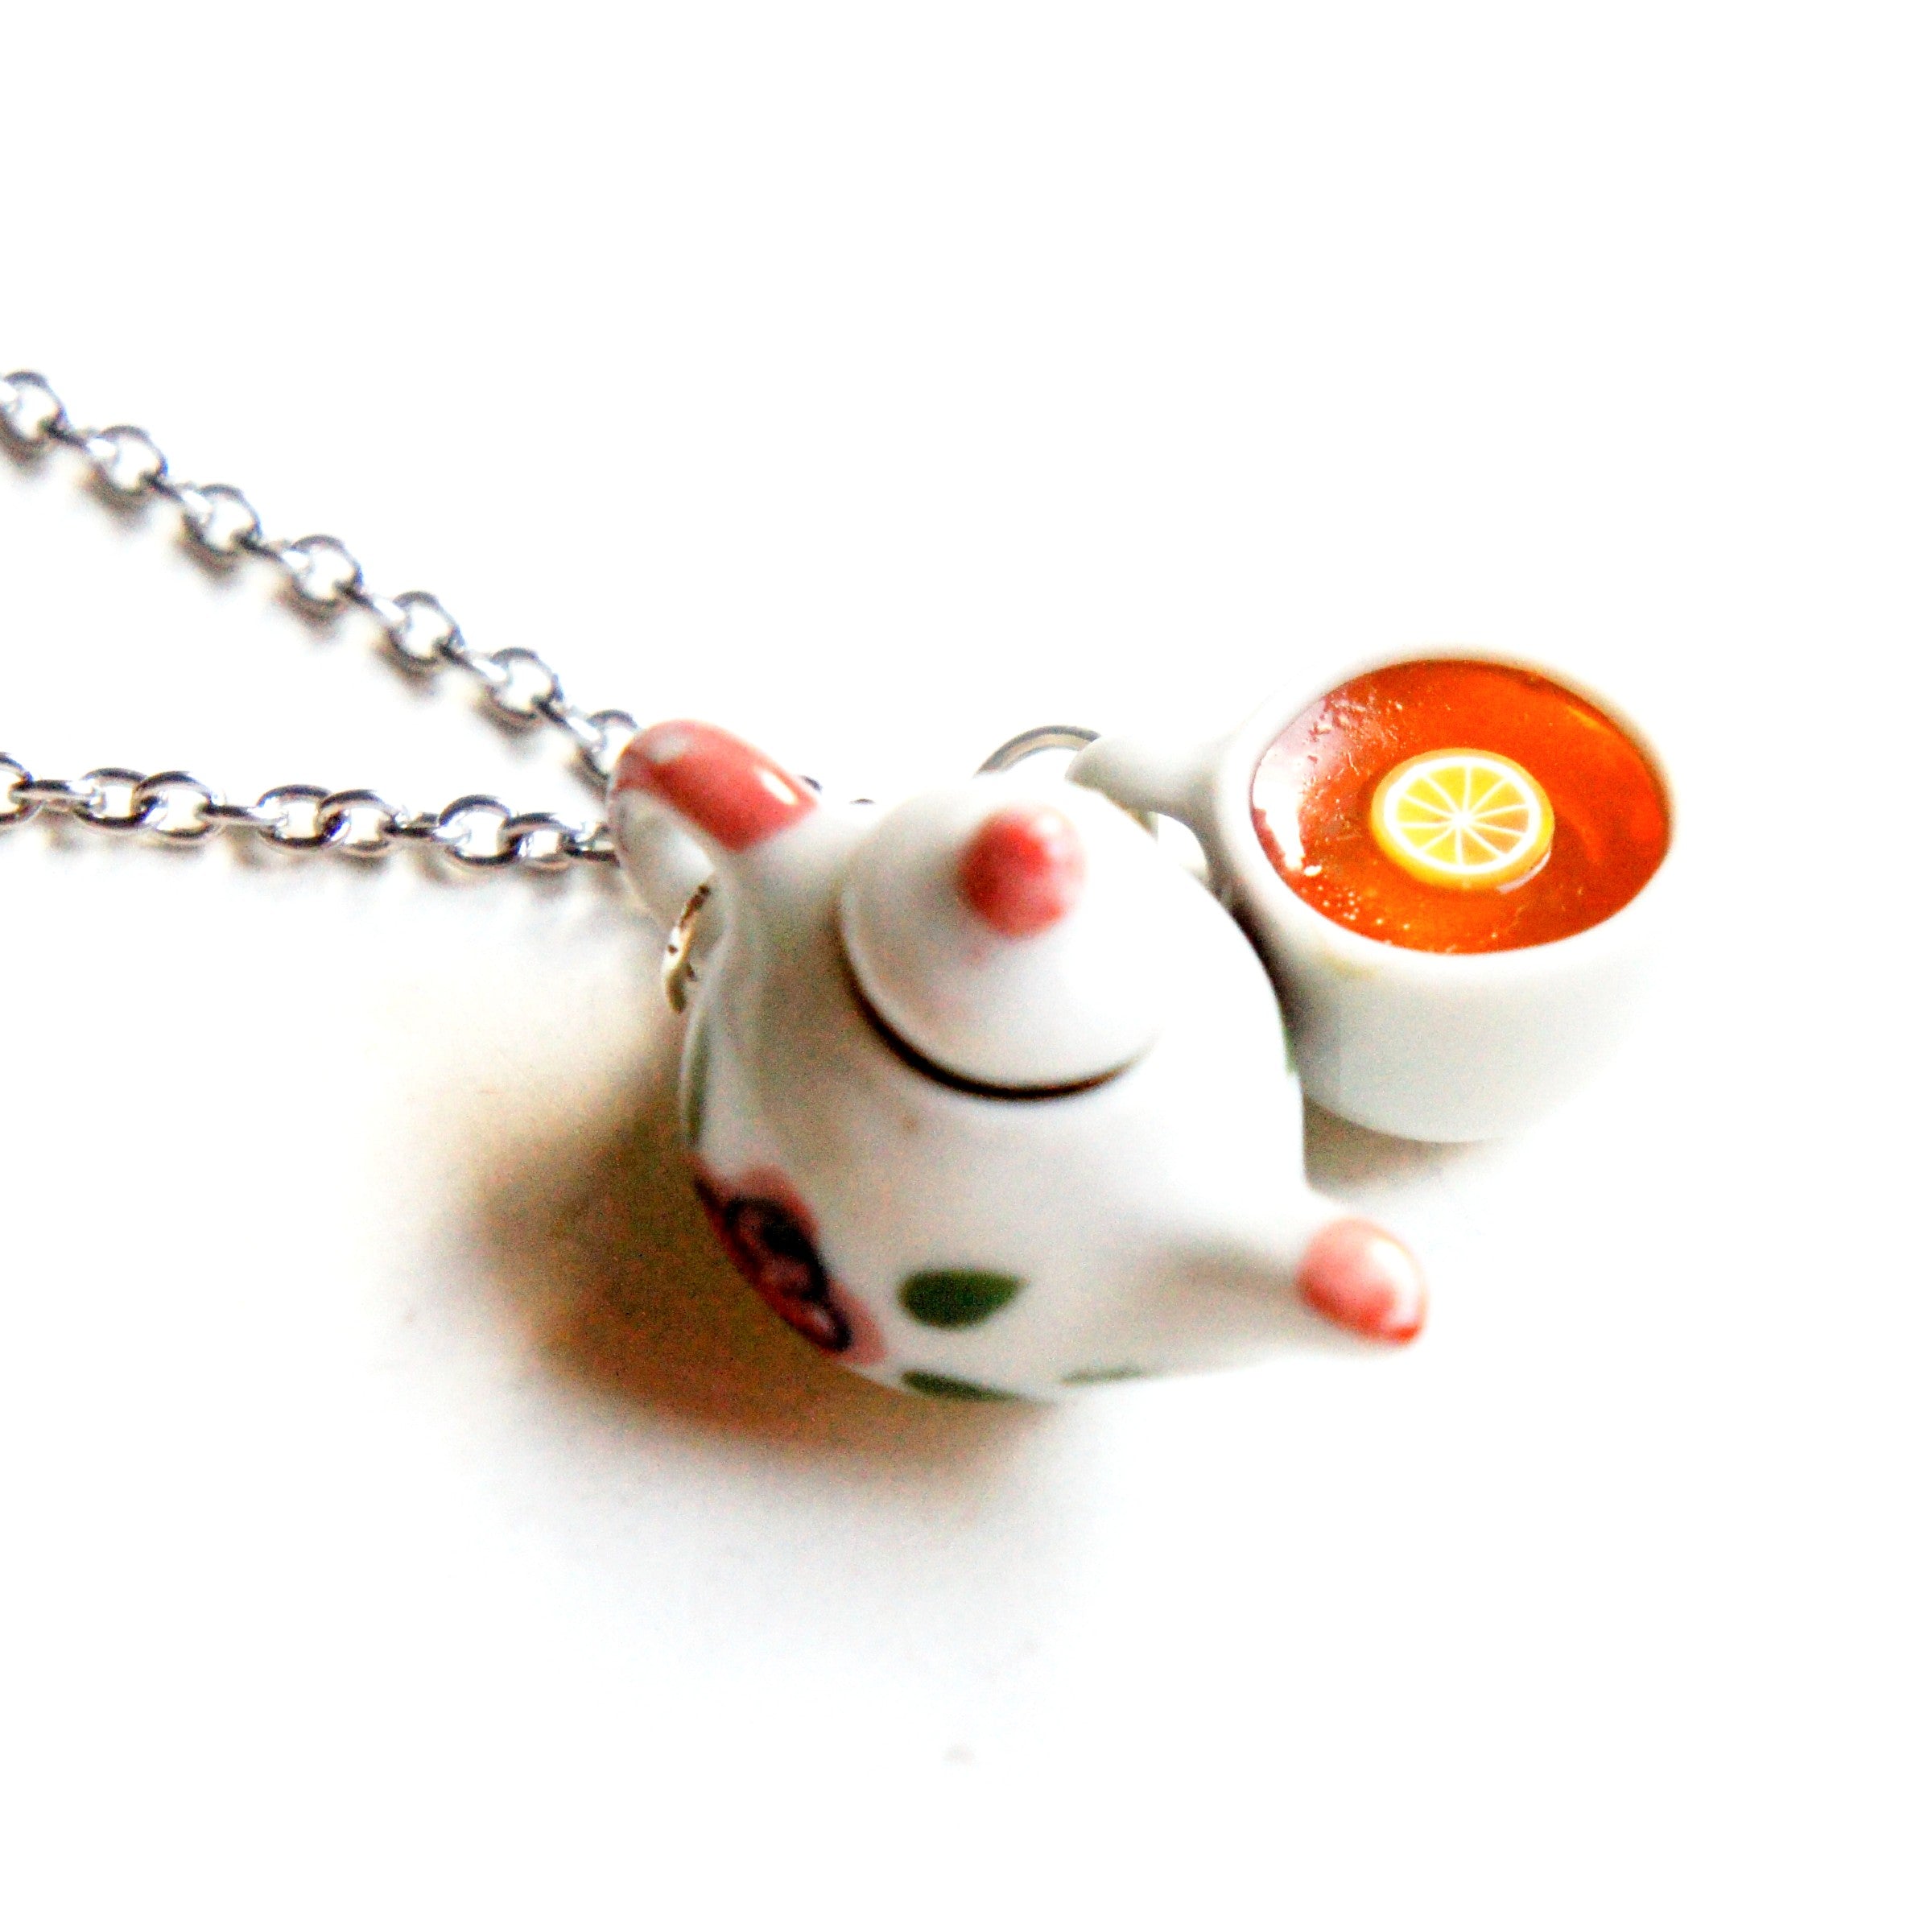 Rose Tea Set Necklace - Jillicious charms and accessories